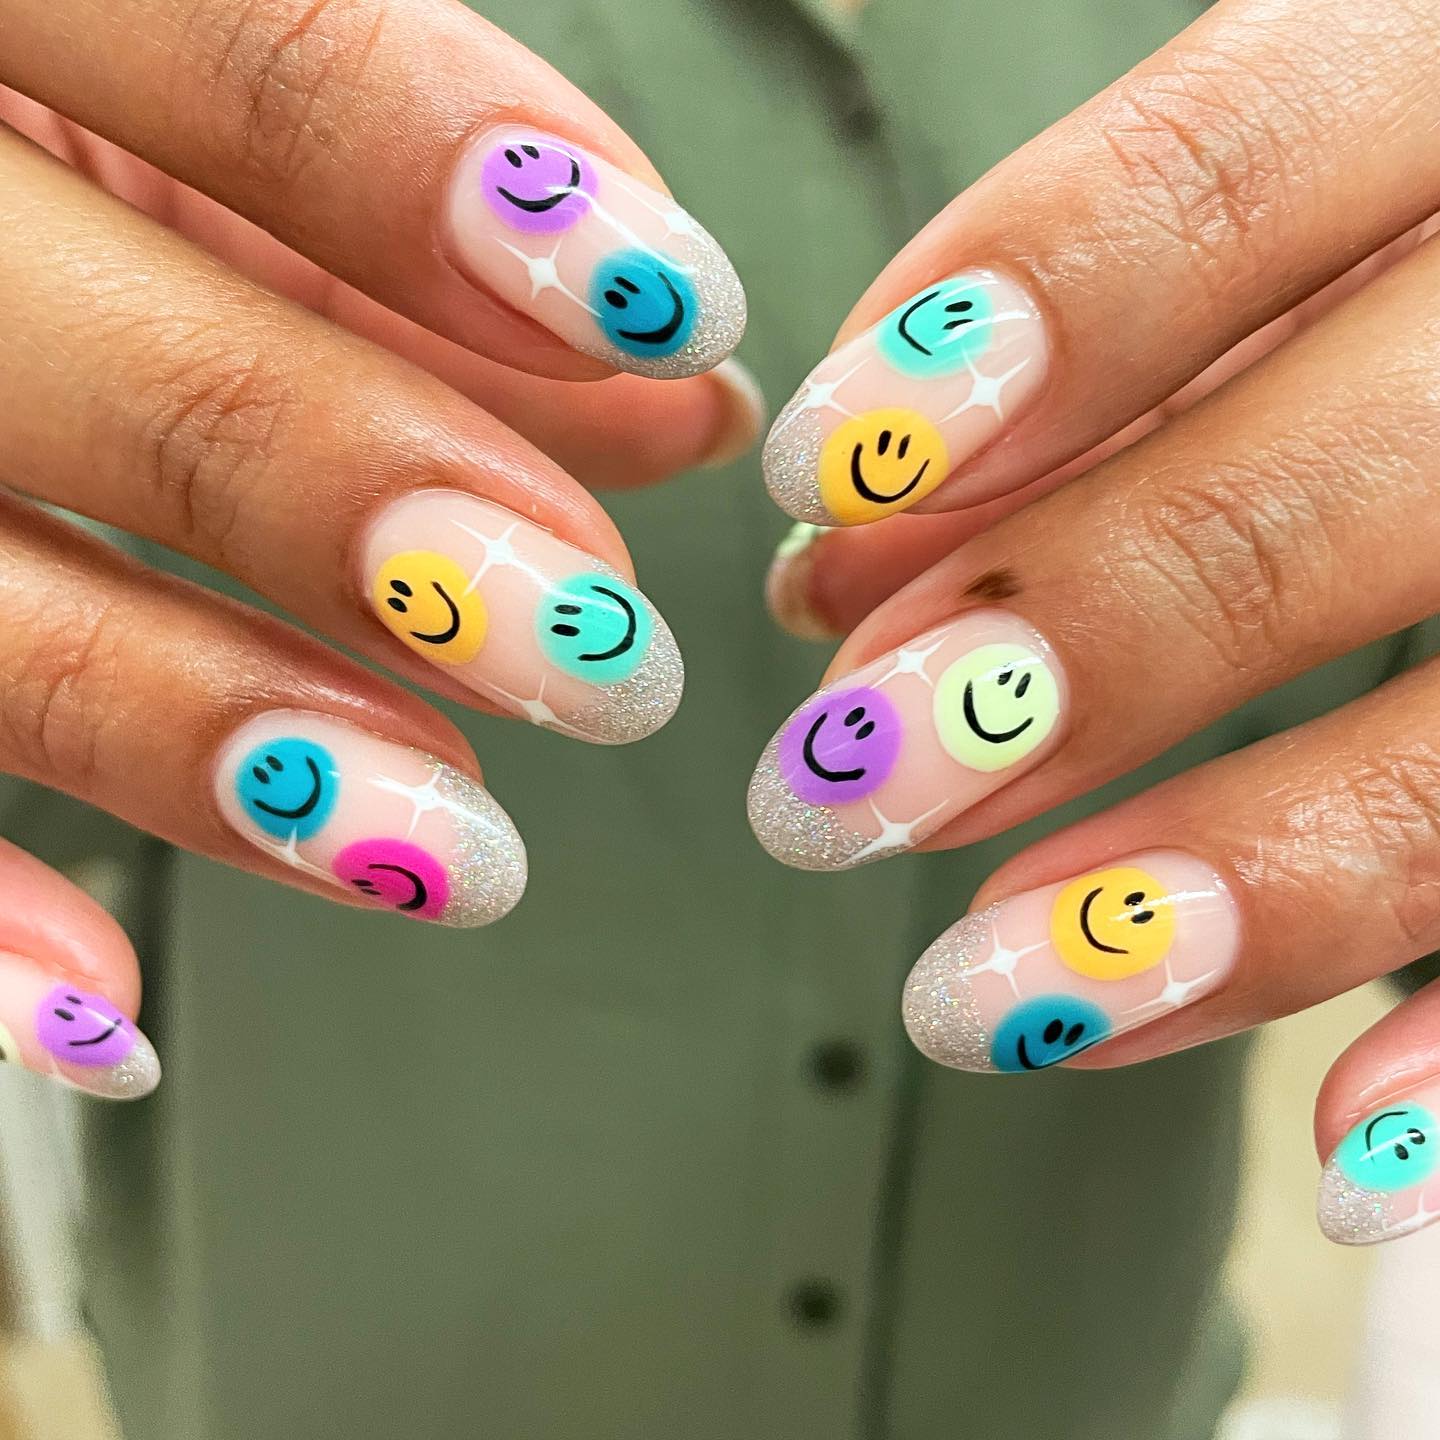 Round Nails with Rainbow Smiley Faces